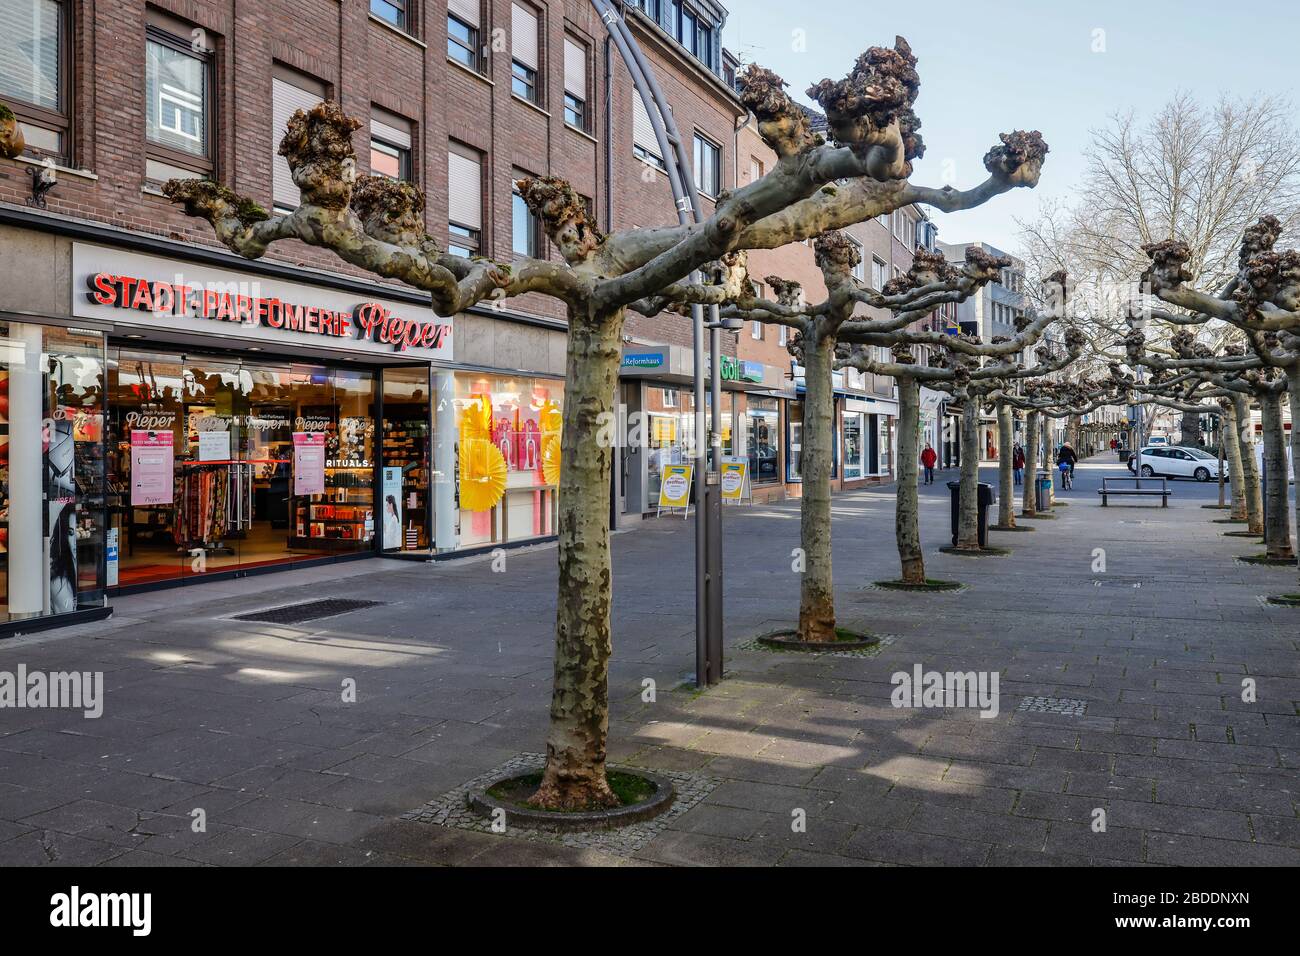 23.03.2020, Viersen, North Rhine-Westphalia, Germany - Contact ban due to corona pandemic, on Monday deserted shopping street with closed shops in the Stock Photo